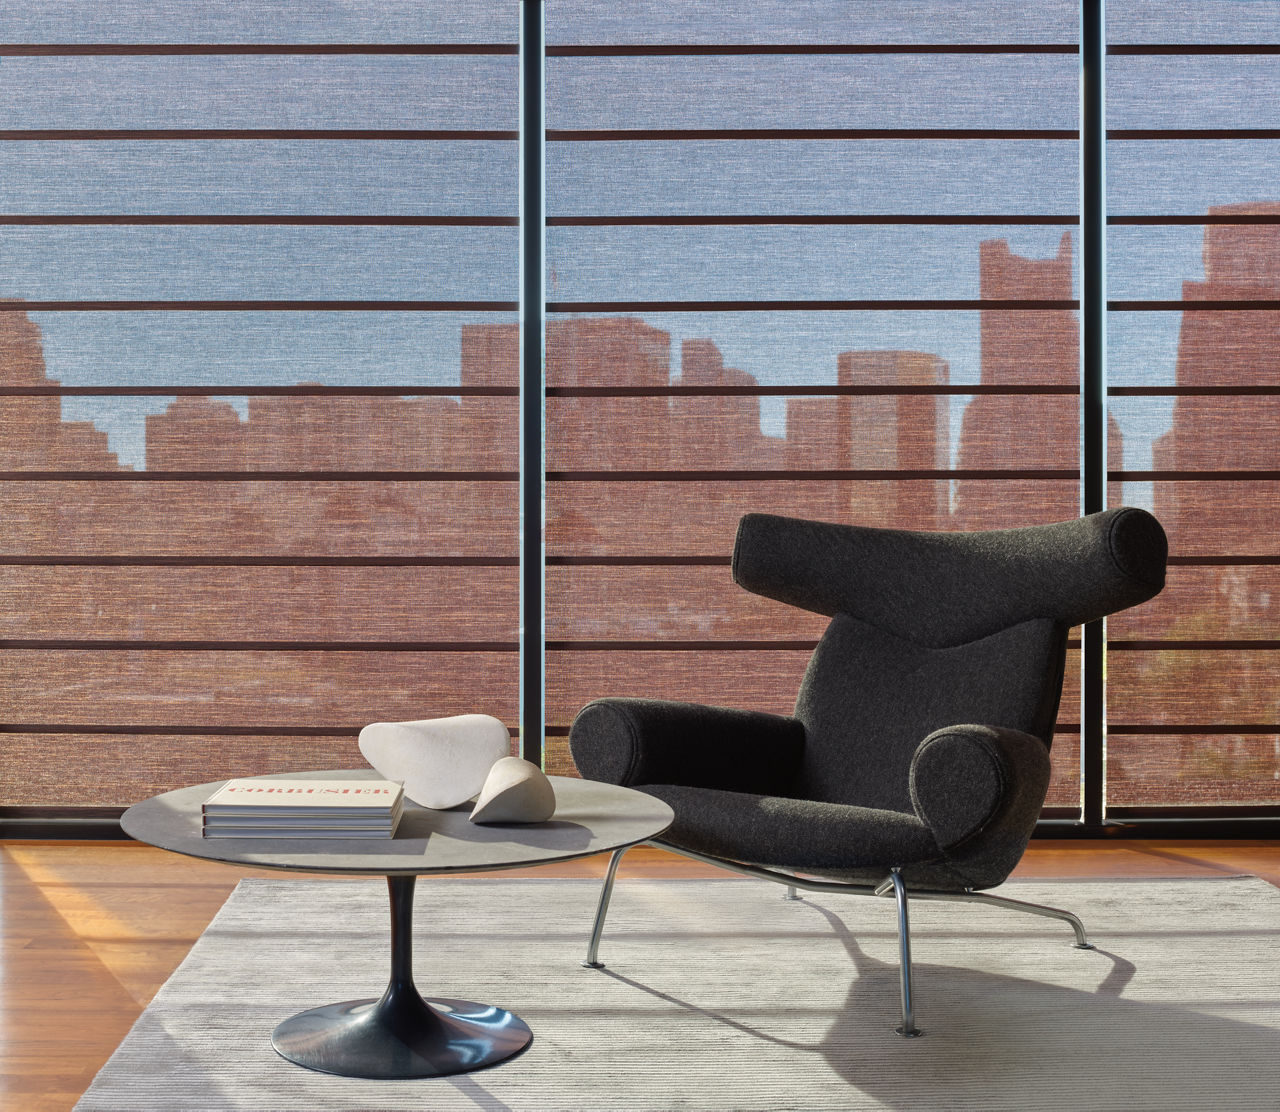 Alustra Architectural Roller Shades Brielle